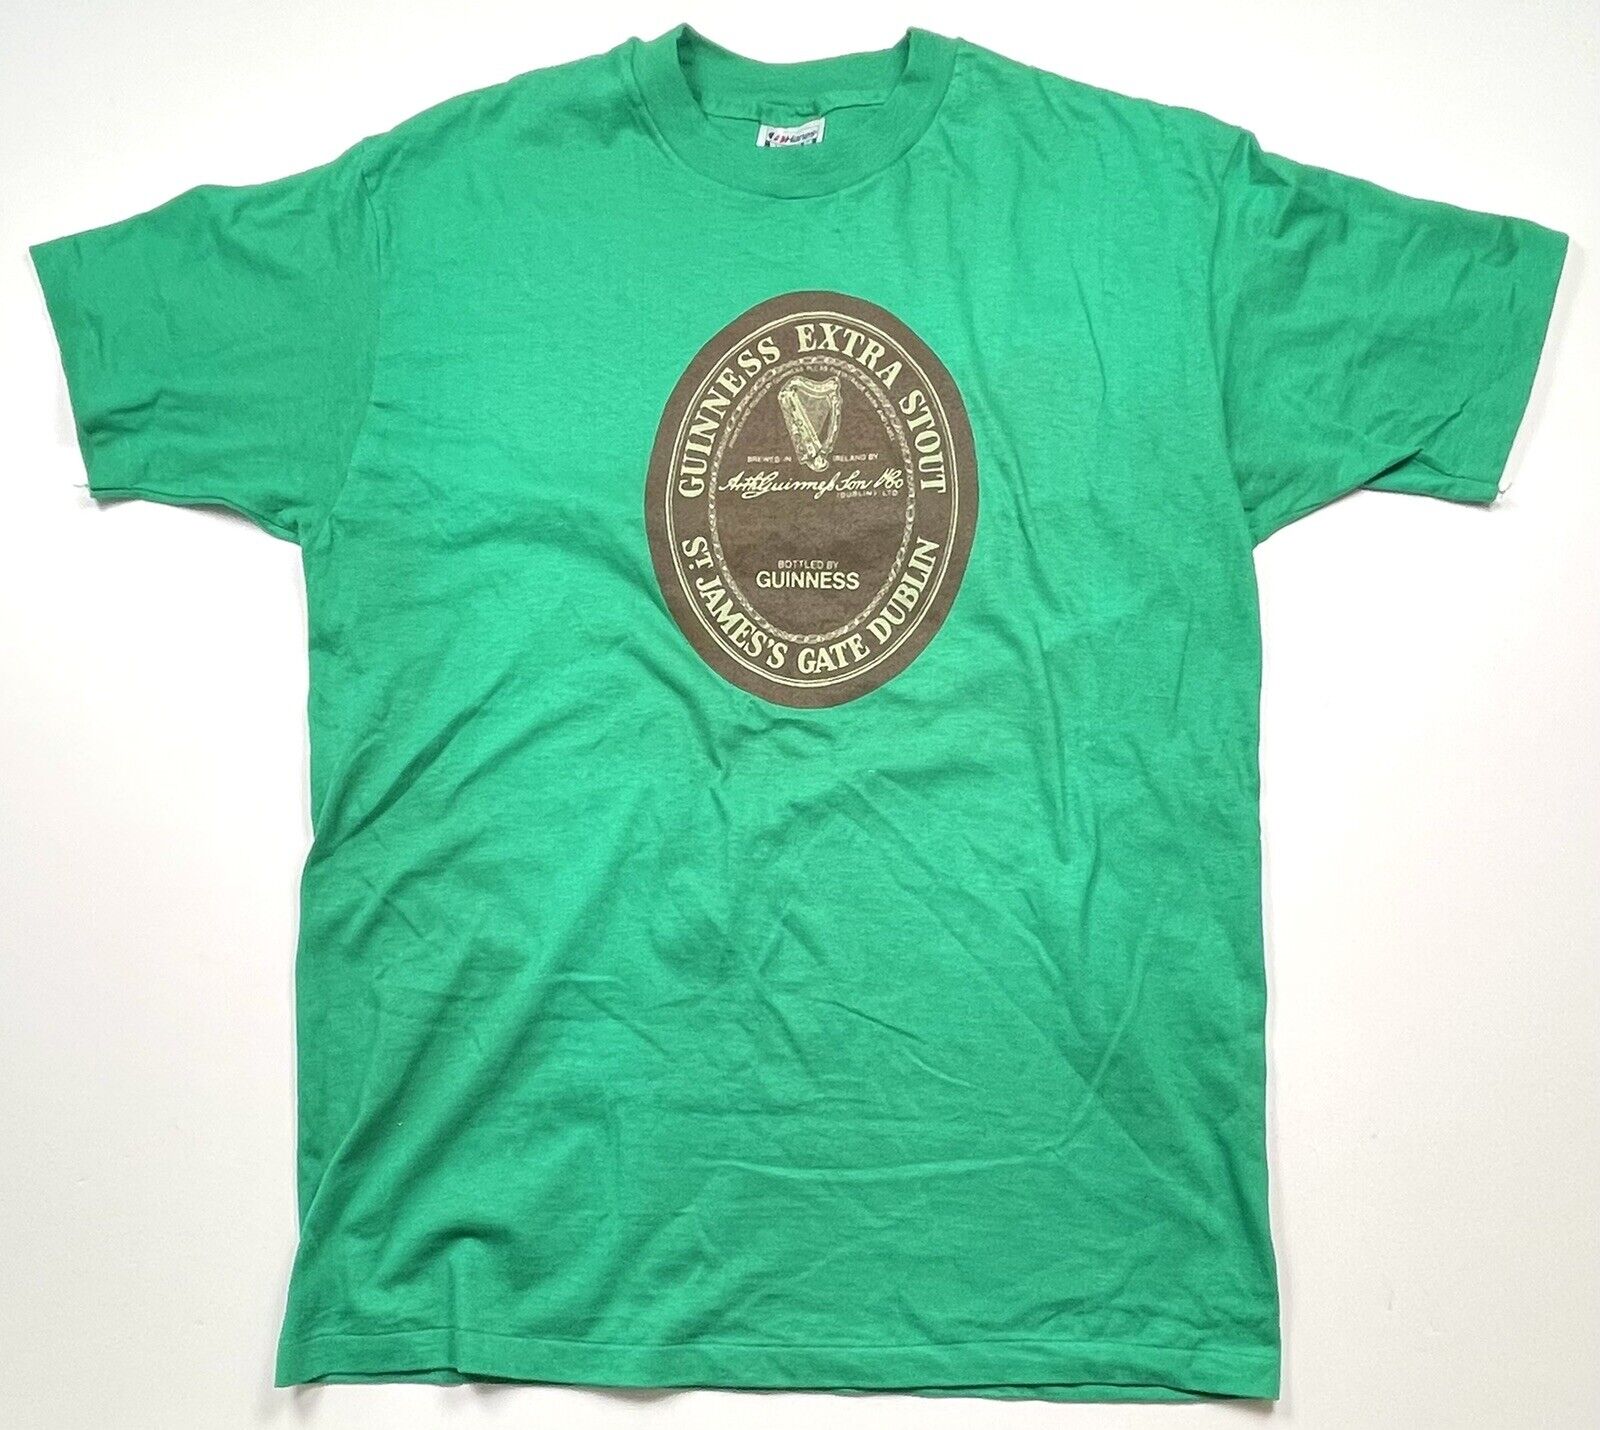 VTG 90s Adult XL (46-48) Green 100% Cotton Guinness Extra Stout T-SHIRT NWOT NEW